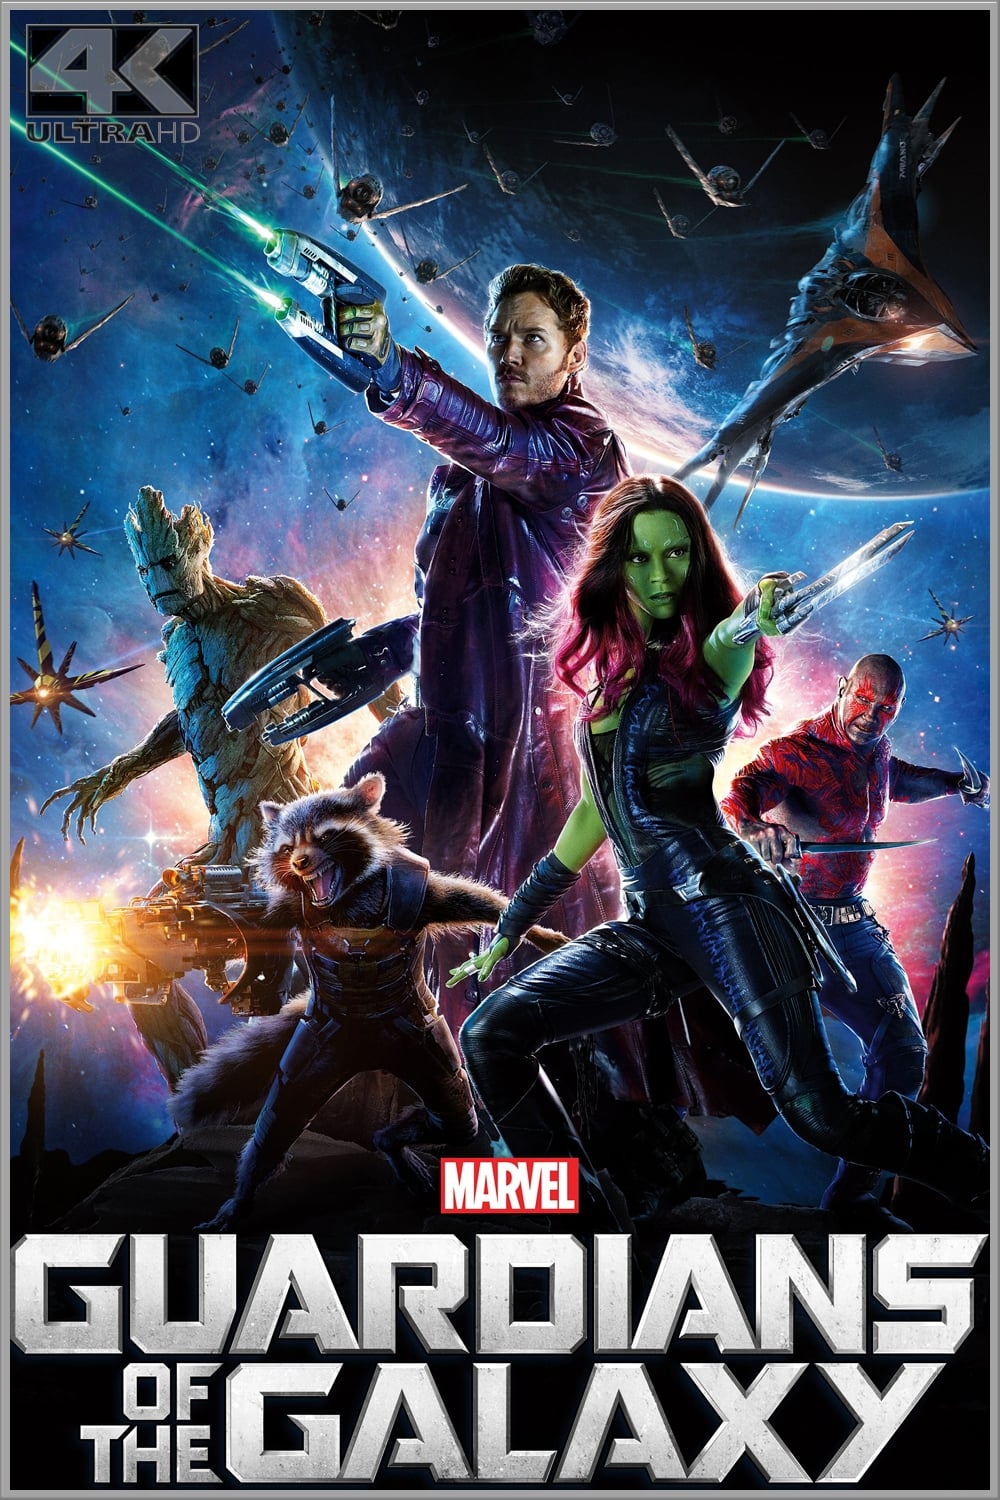 Theatrical poster for Guardians of the Galaxy